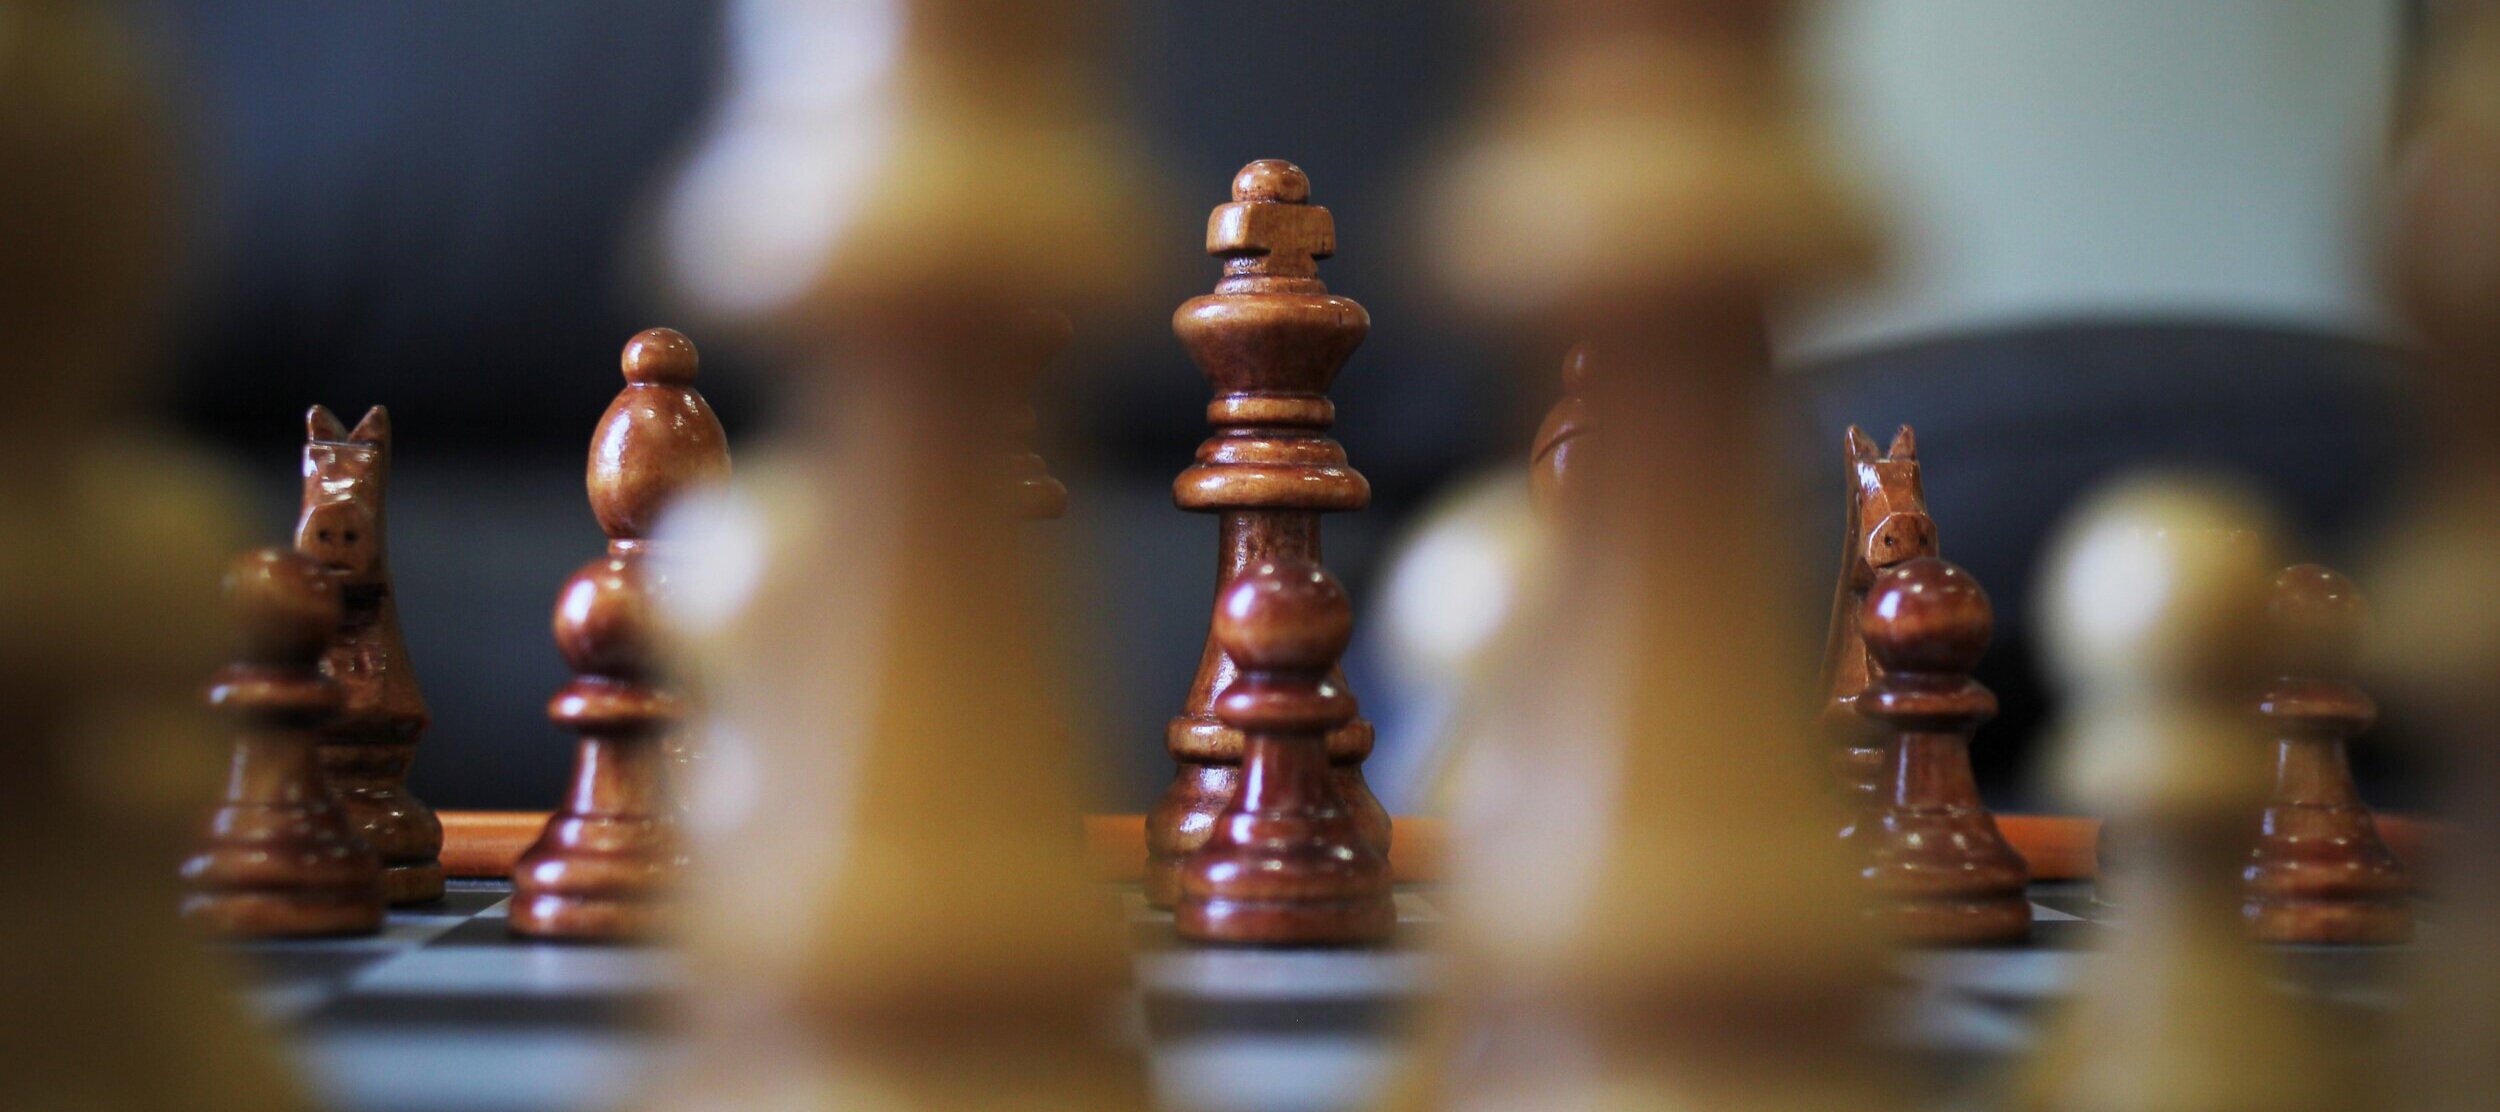 The winter chess tournament is set for Feb. 12